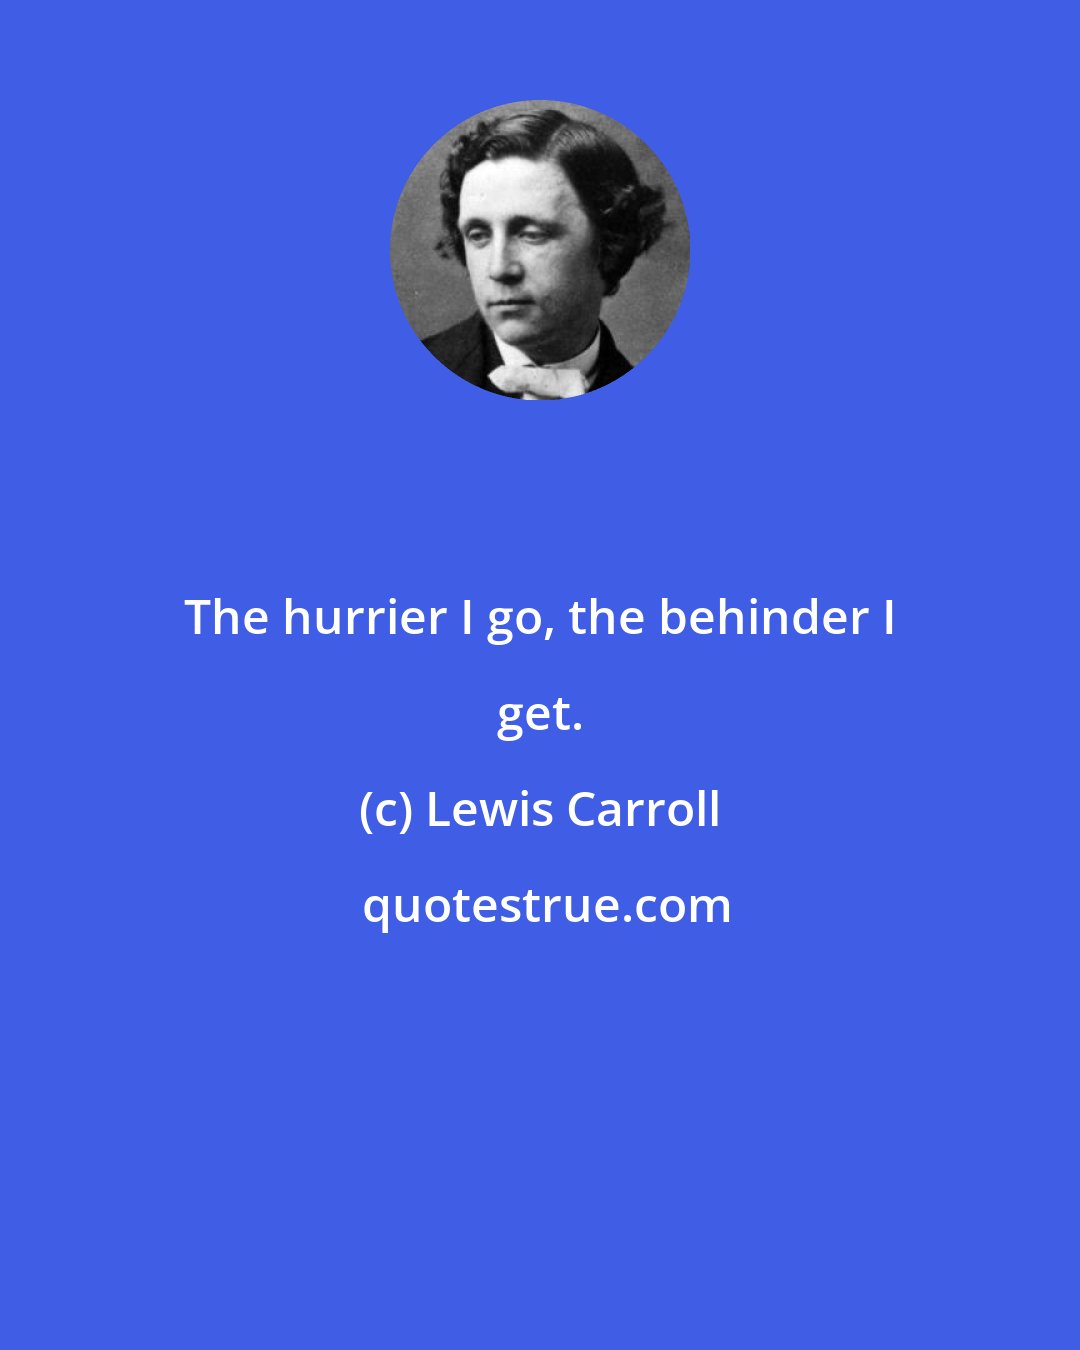 Lewis Carroll: The hurrier I go, the behinder I get.